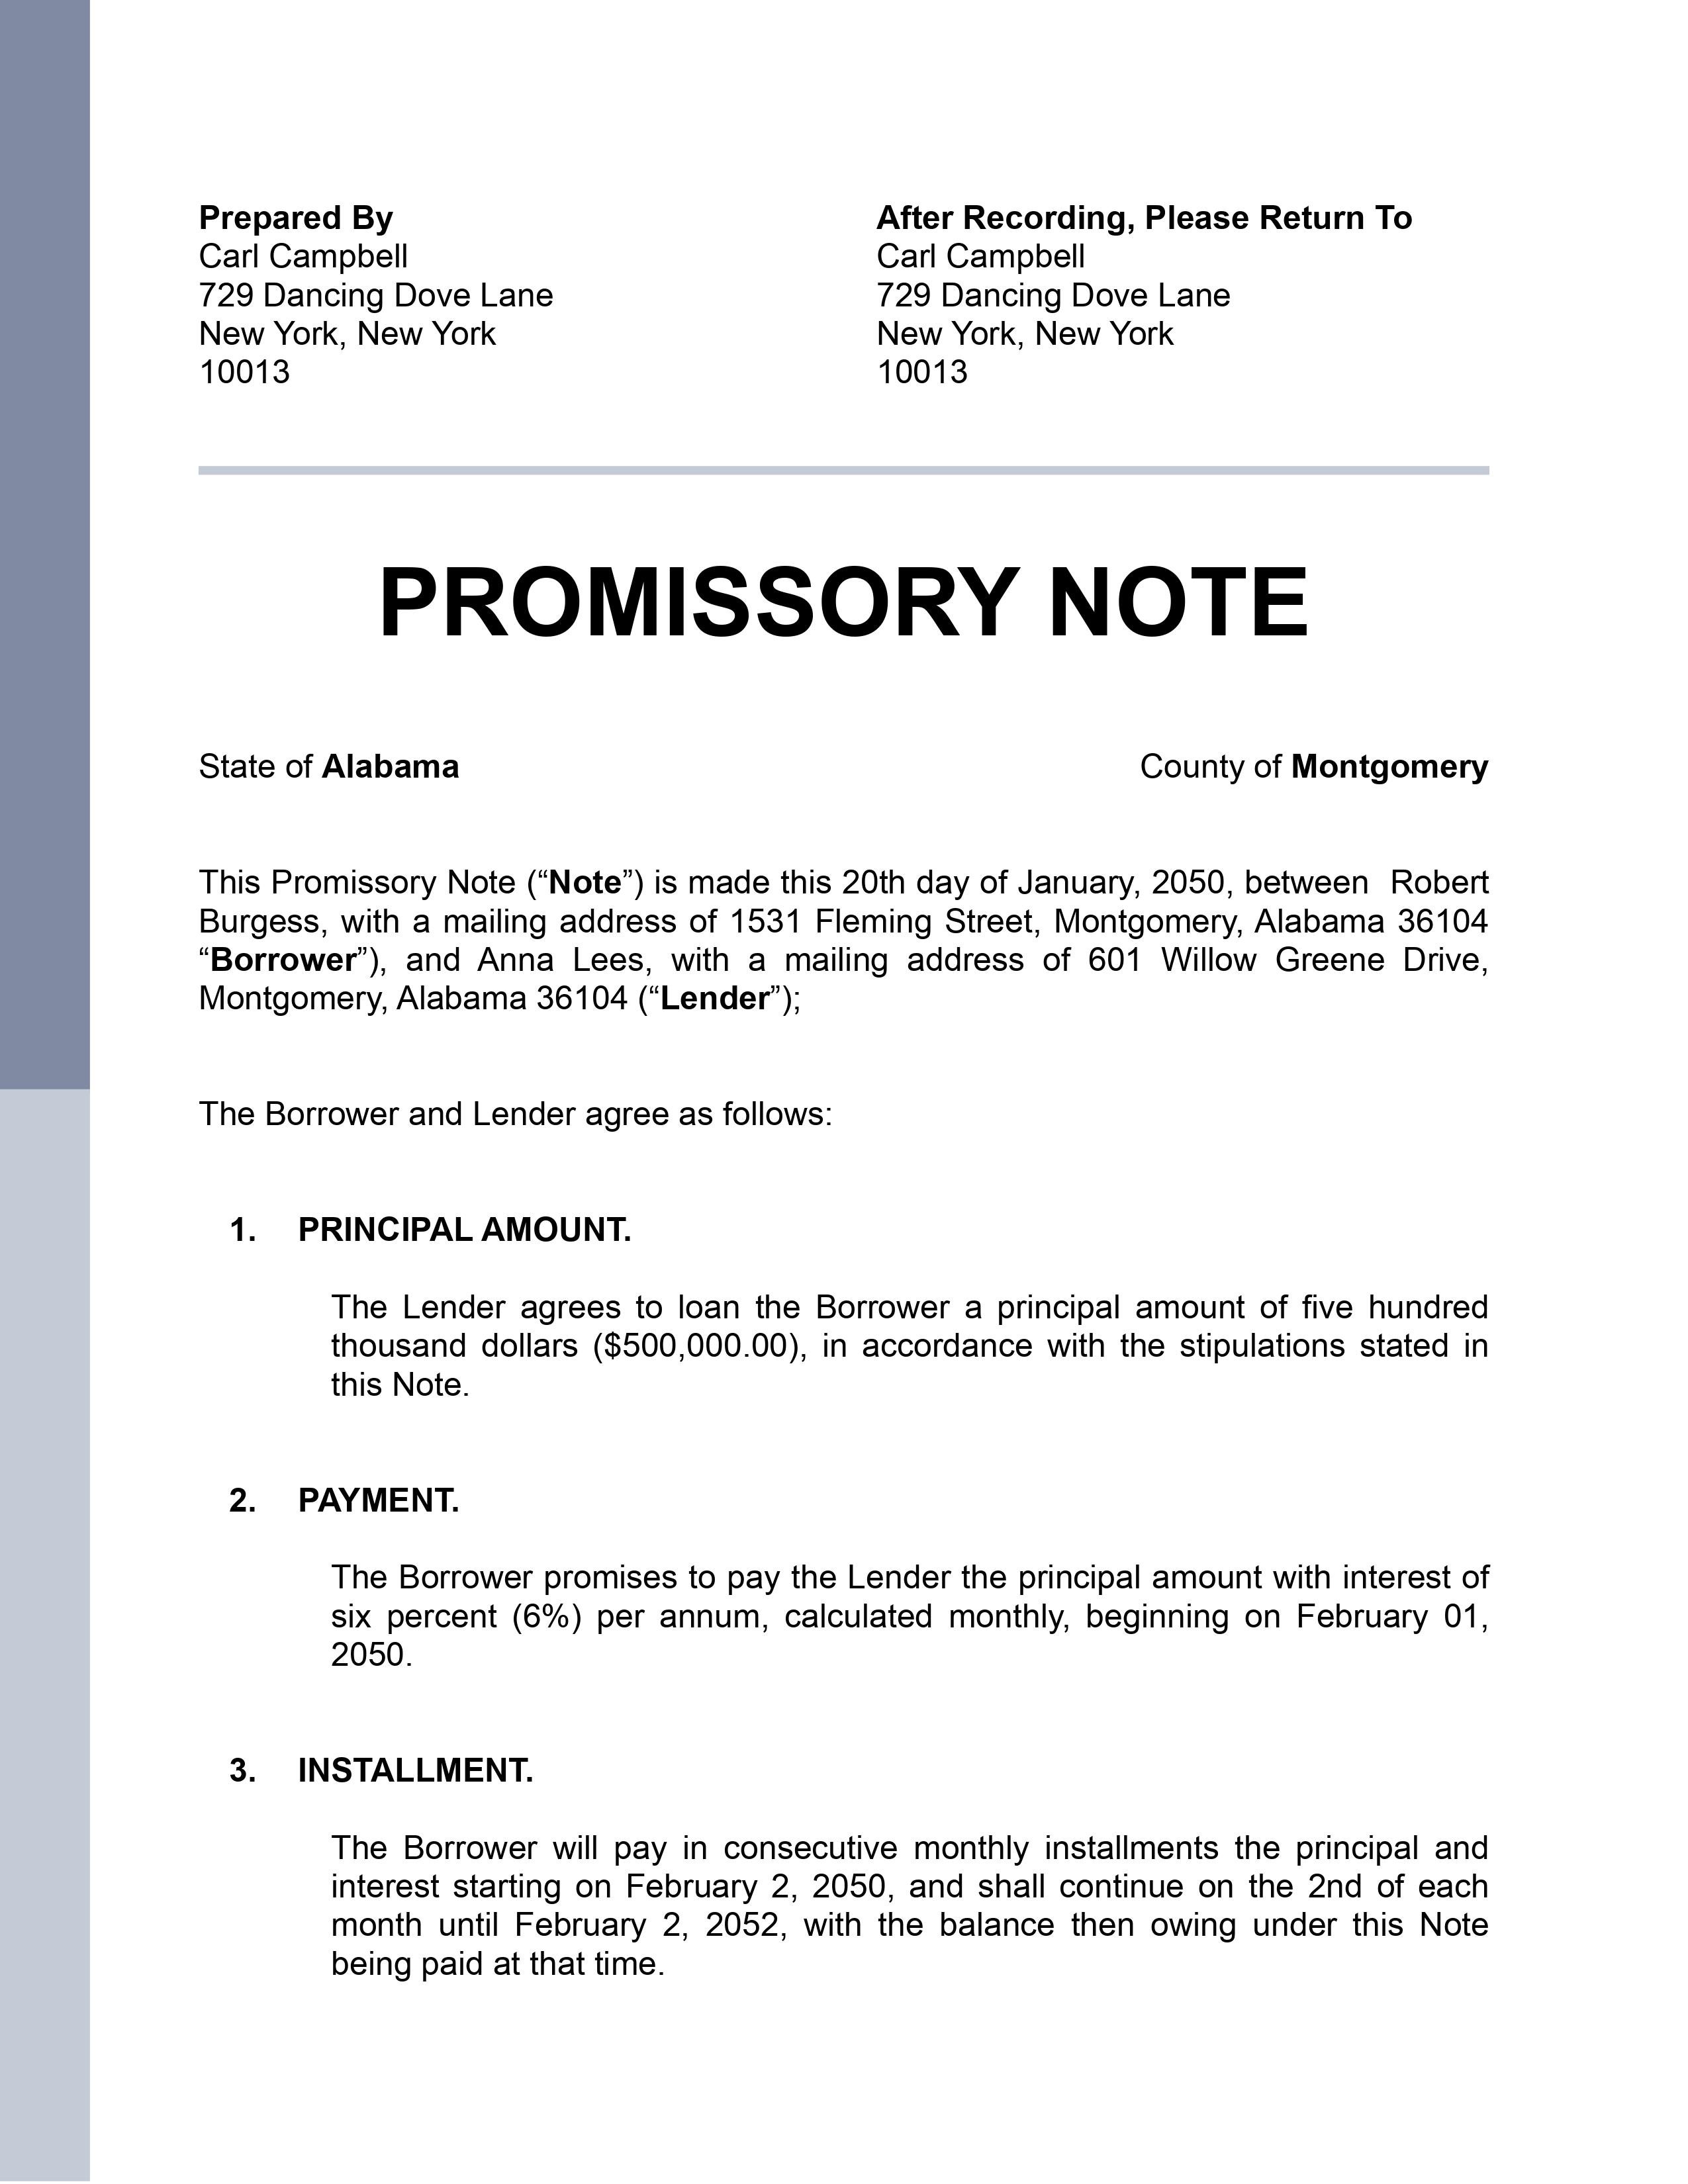 FREE Promissory Note Template Download in Word, Google Docs, PDF